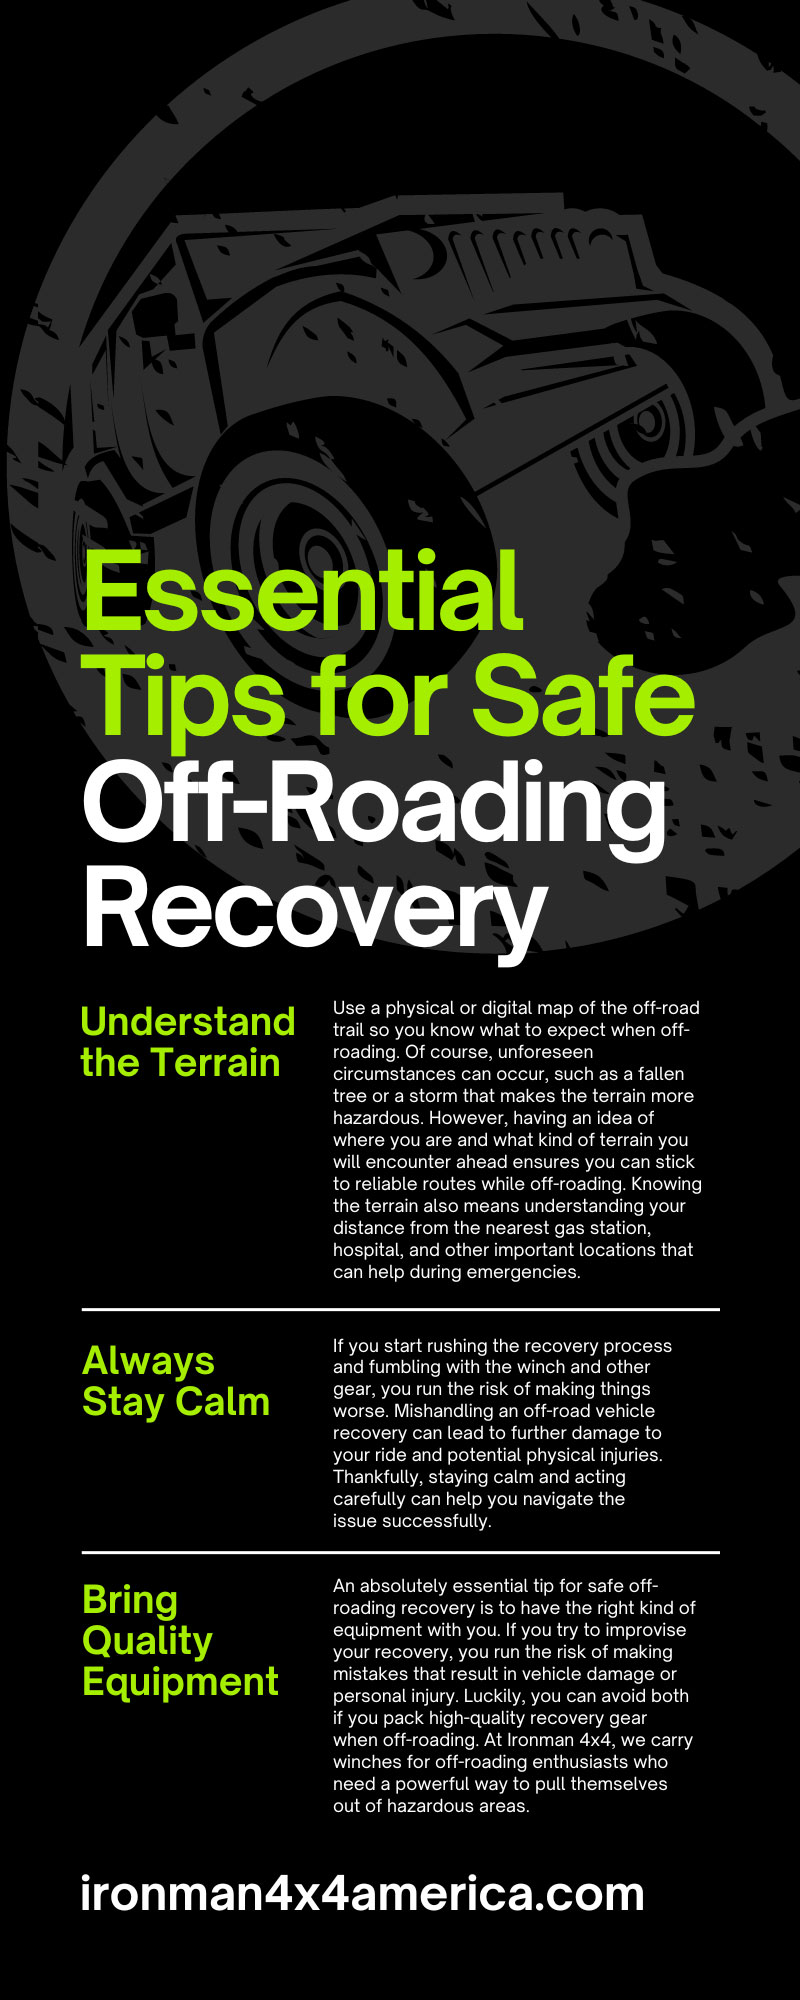 6 Essential Tips for Safe Off-Roading Recovery